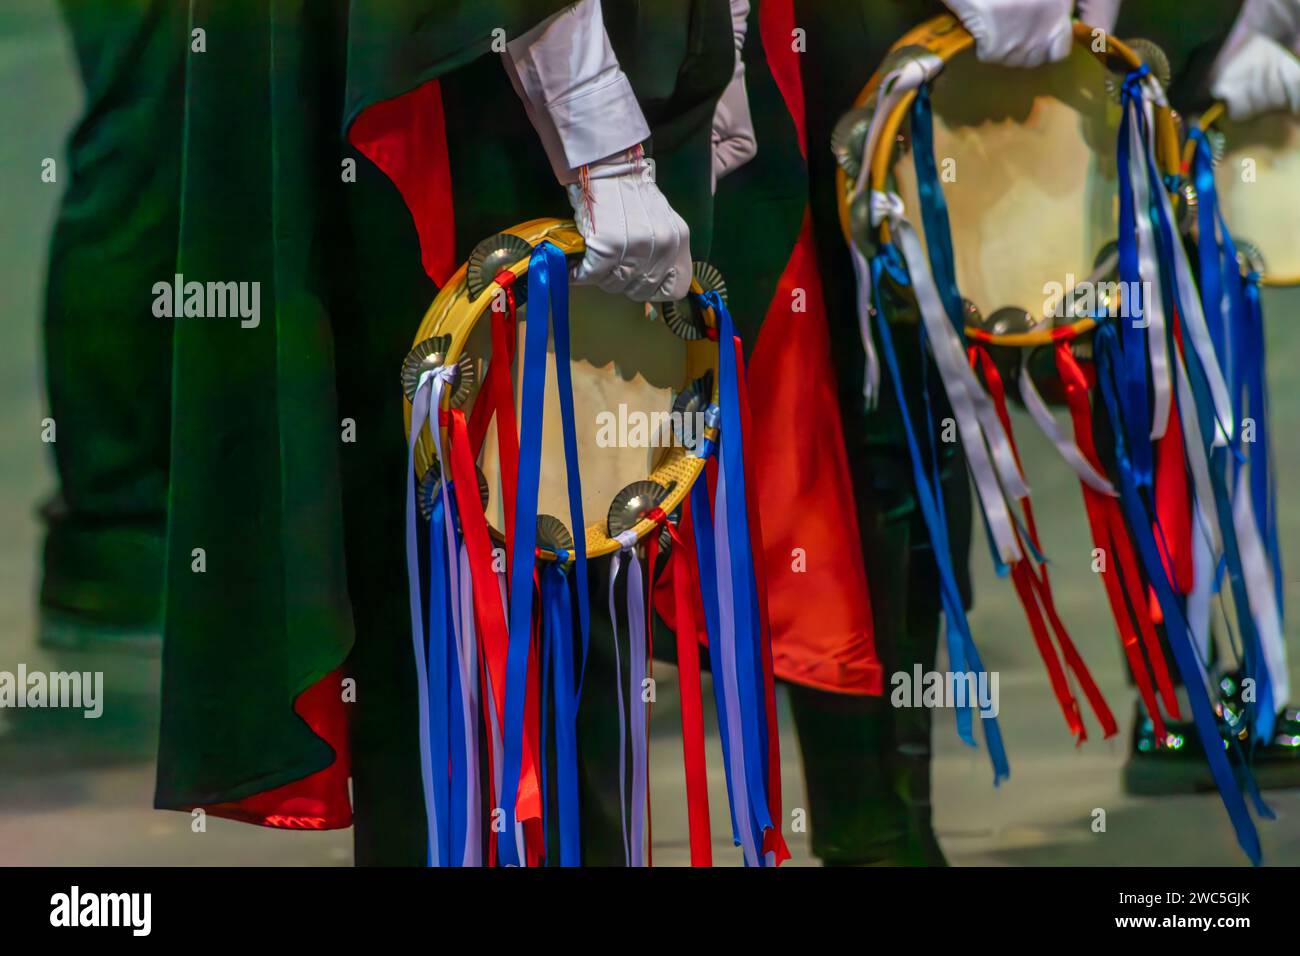 The tambourine is a fundamental instrument of the rondallas, popular musical performances with parades and flag bearers. Stock Photo